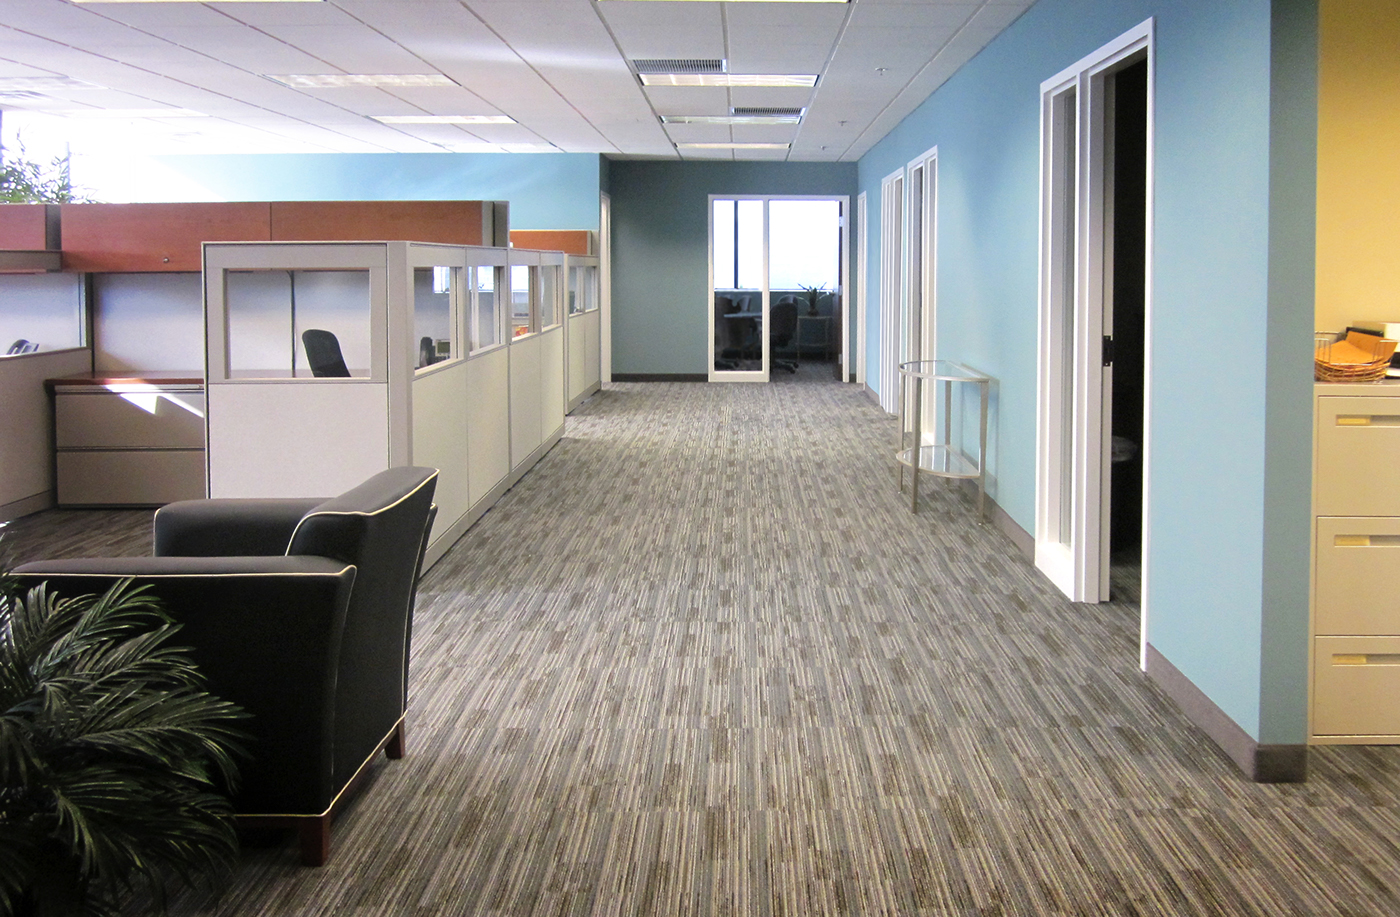 Office corporate furniture finishes lighting